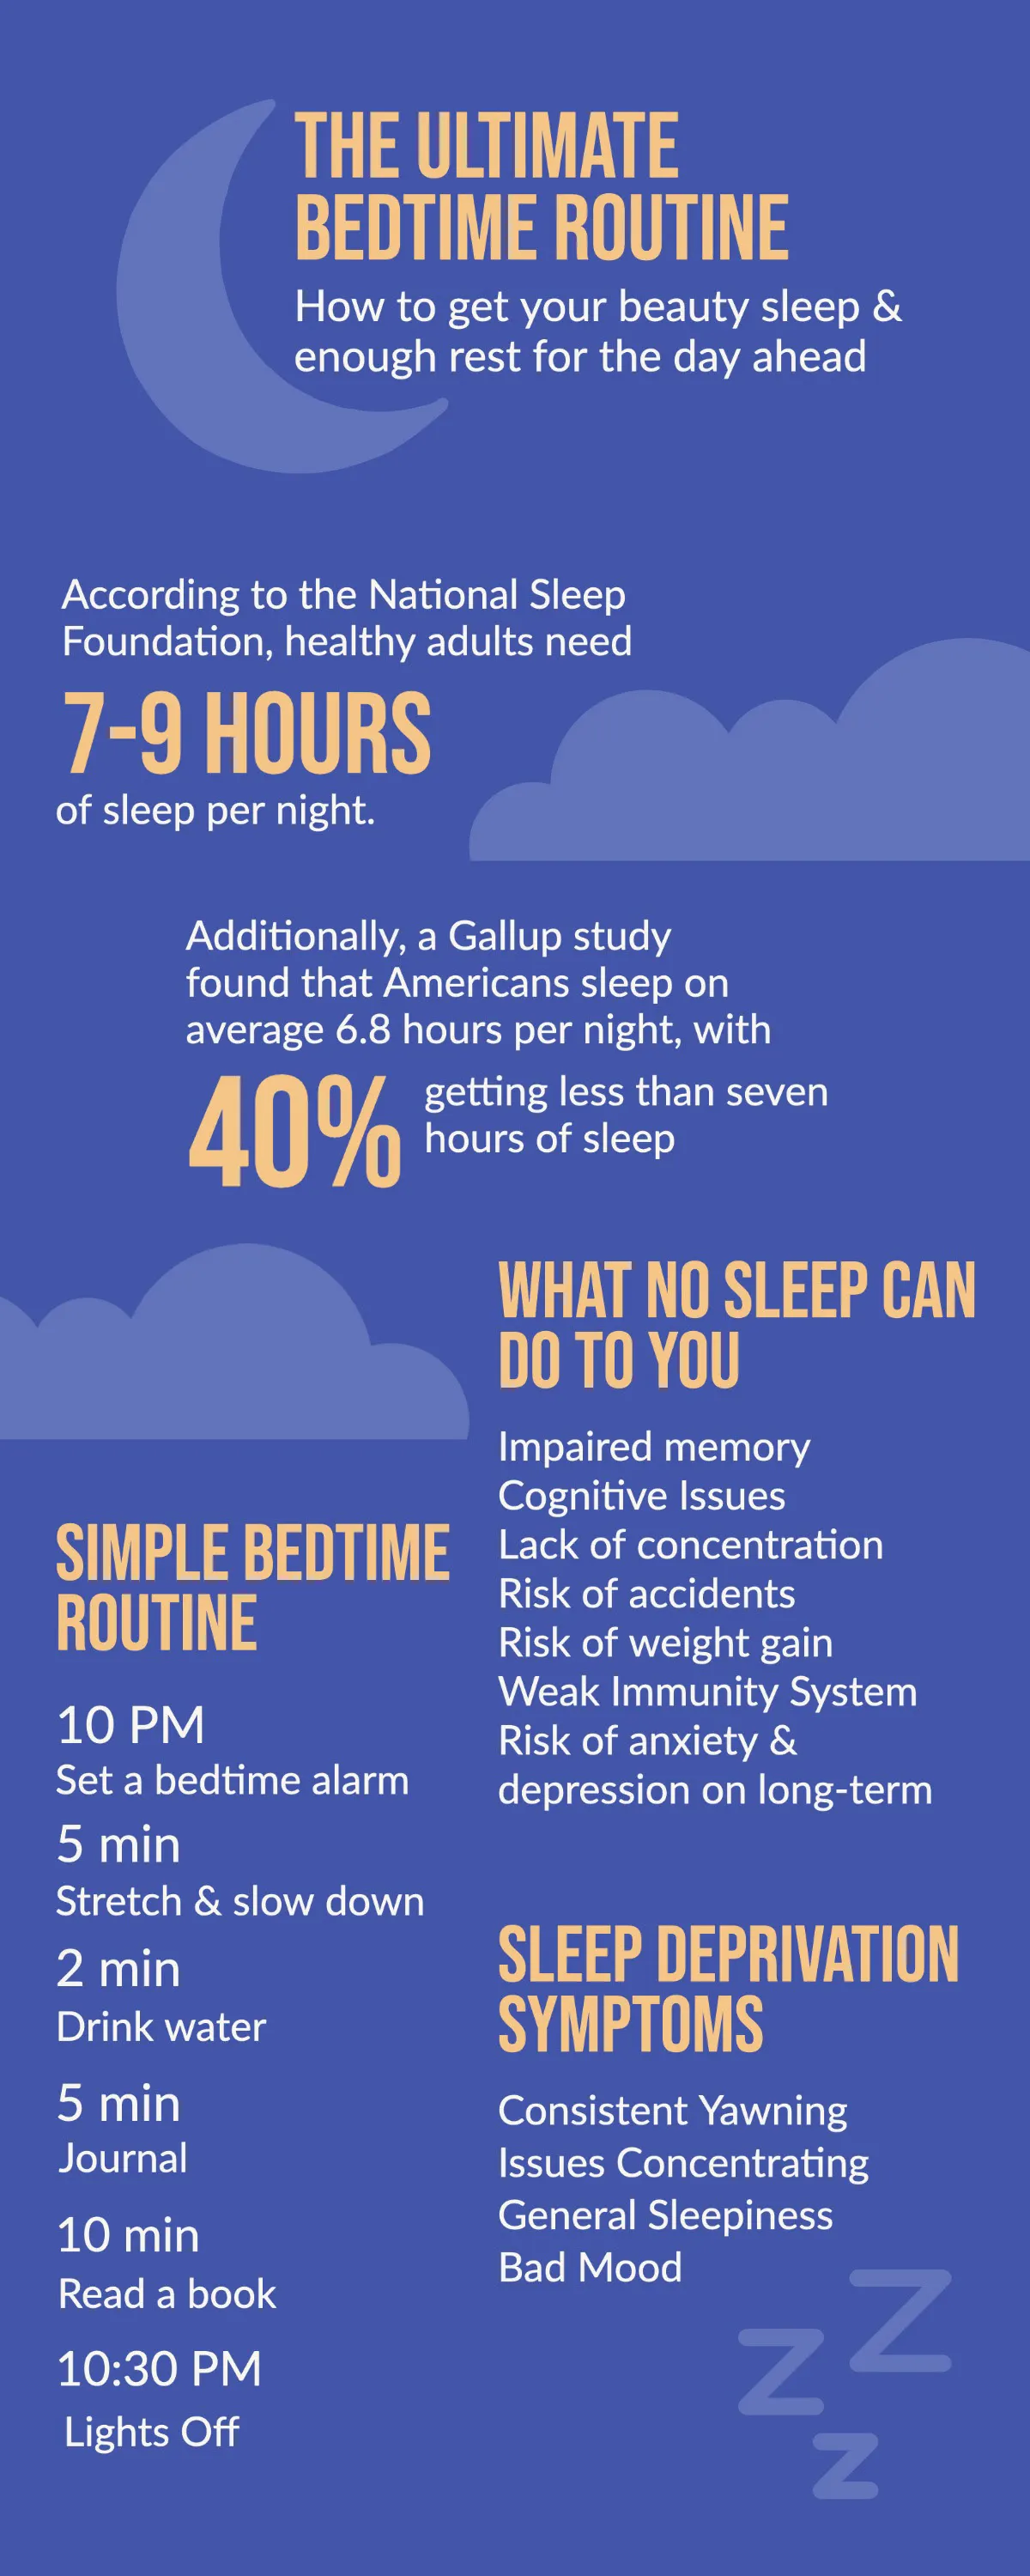 Orange and Blue Bed Time Routine Infographic